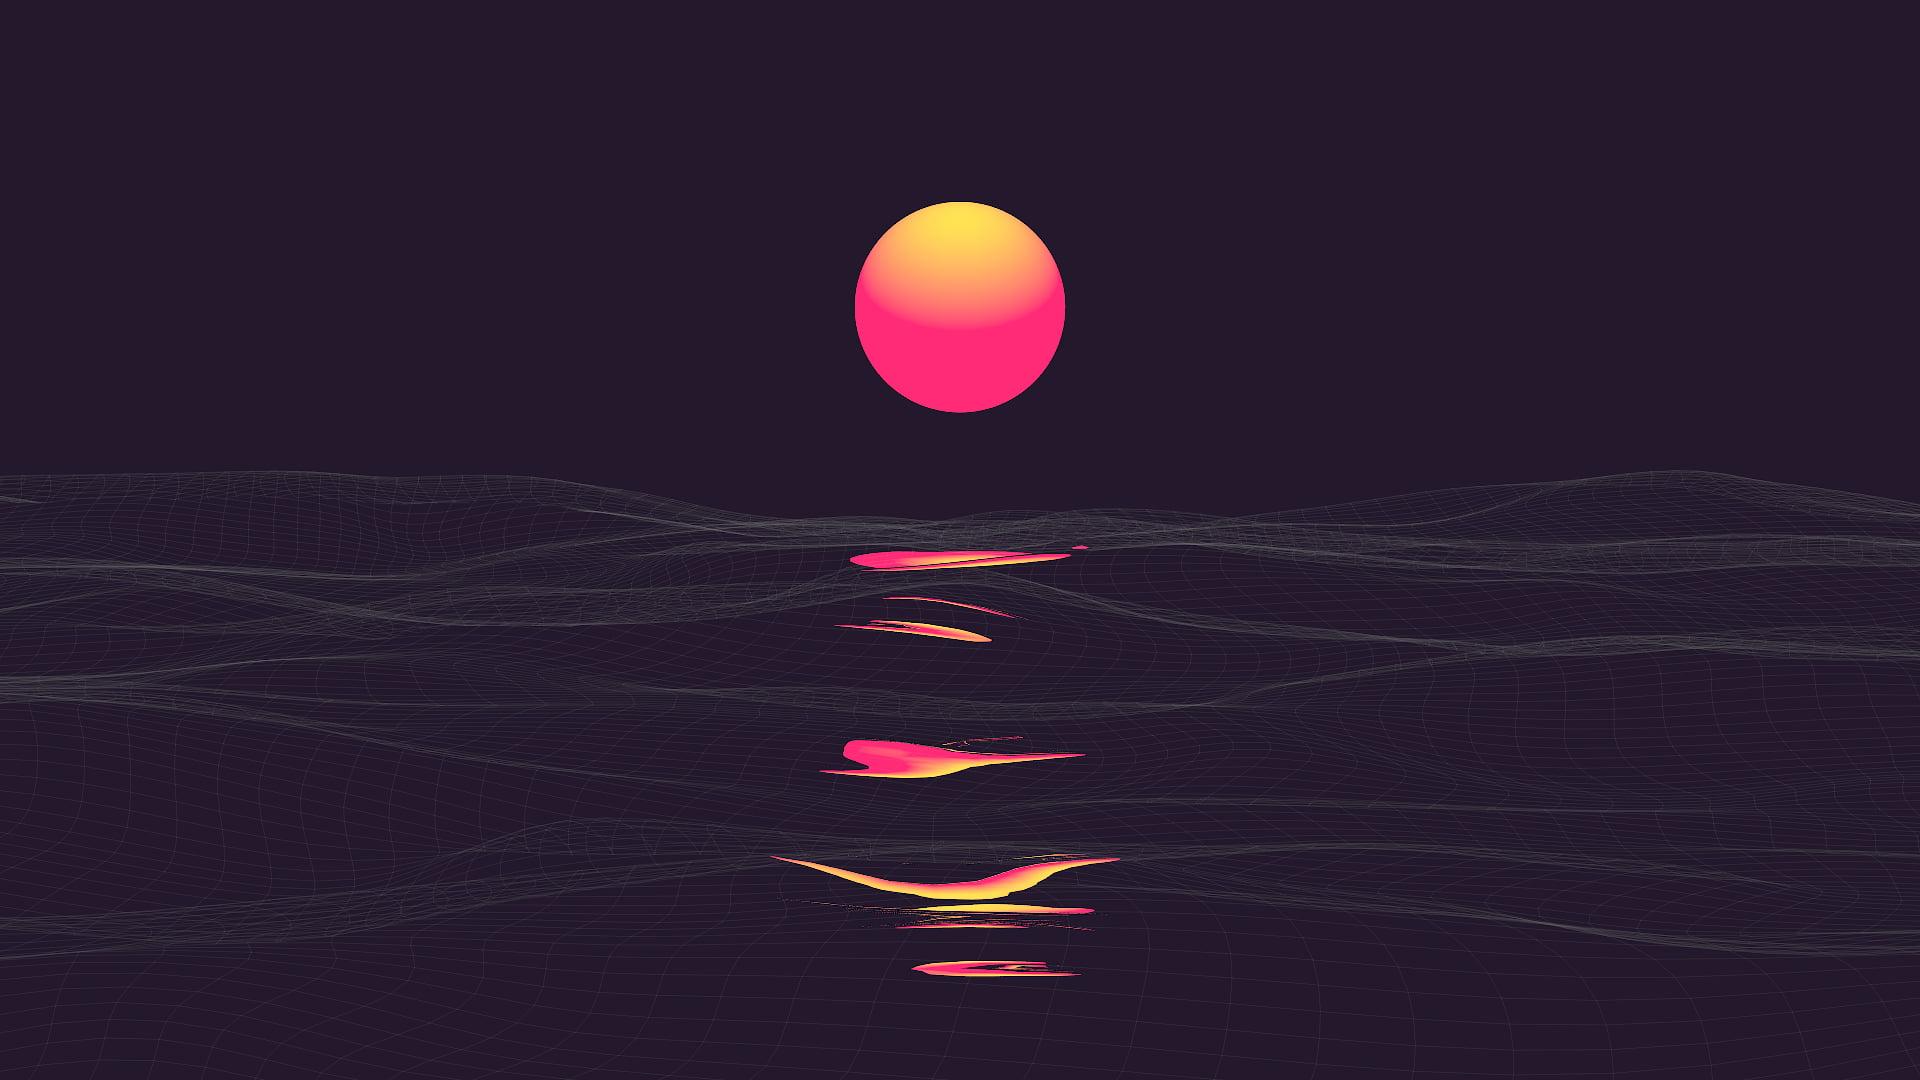 Orange and red sun illustration, landscape, abstract